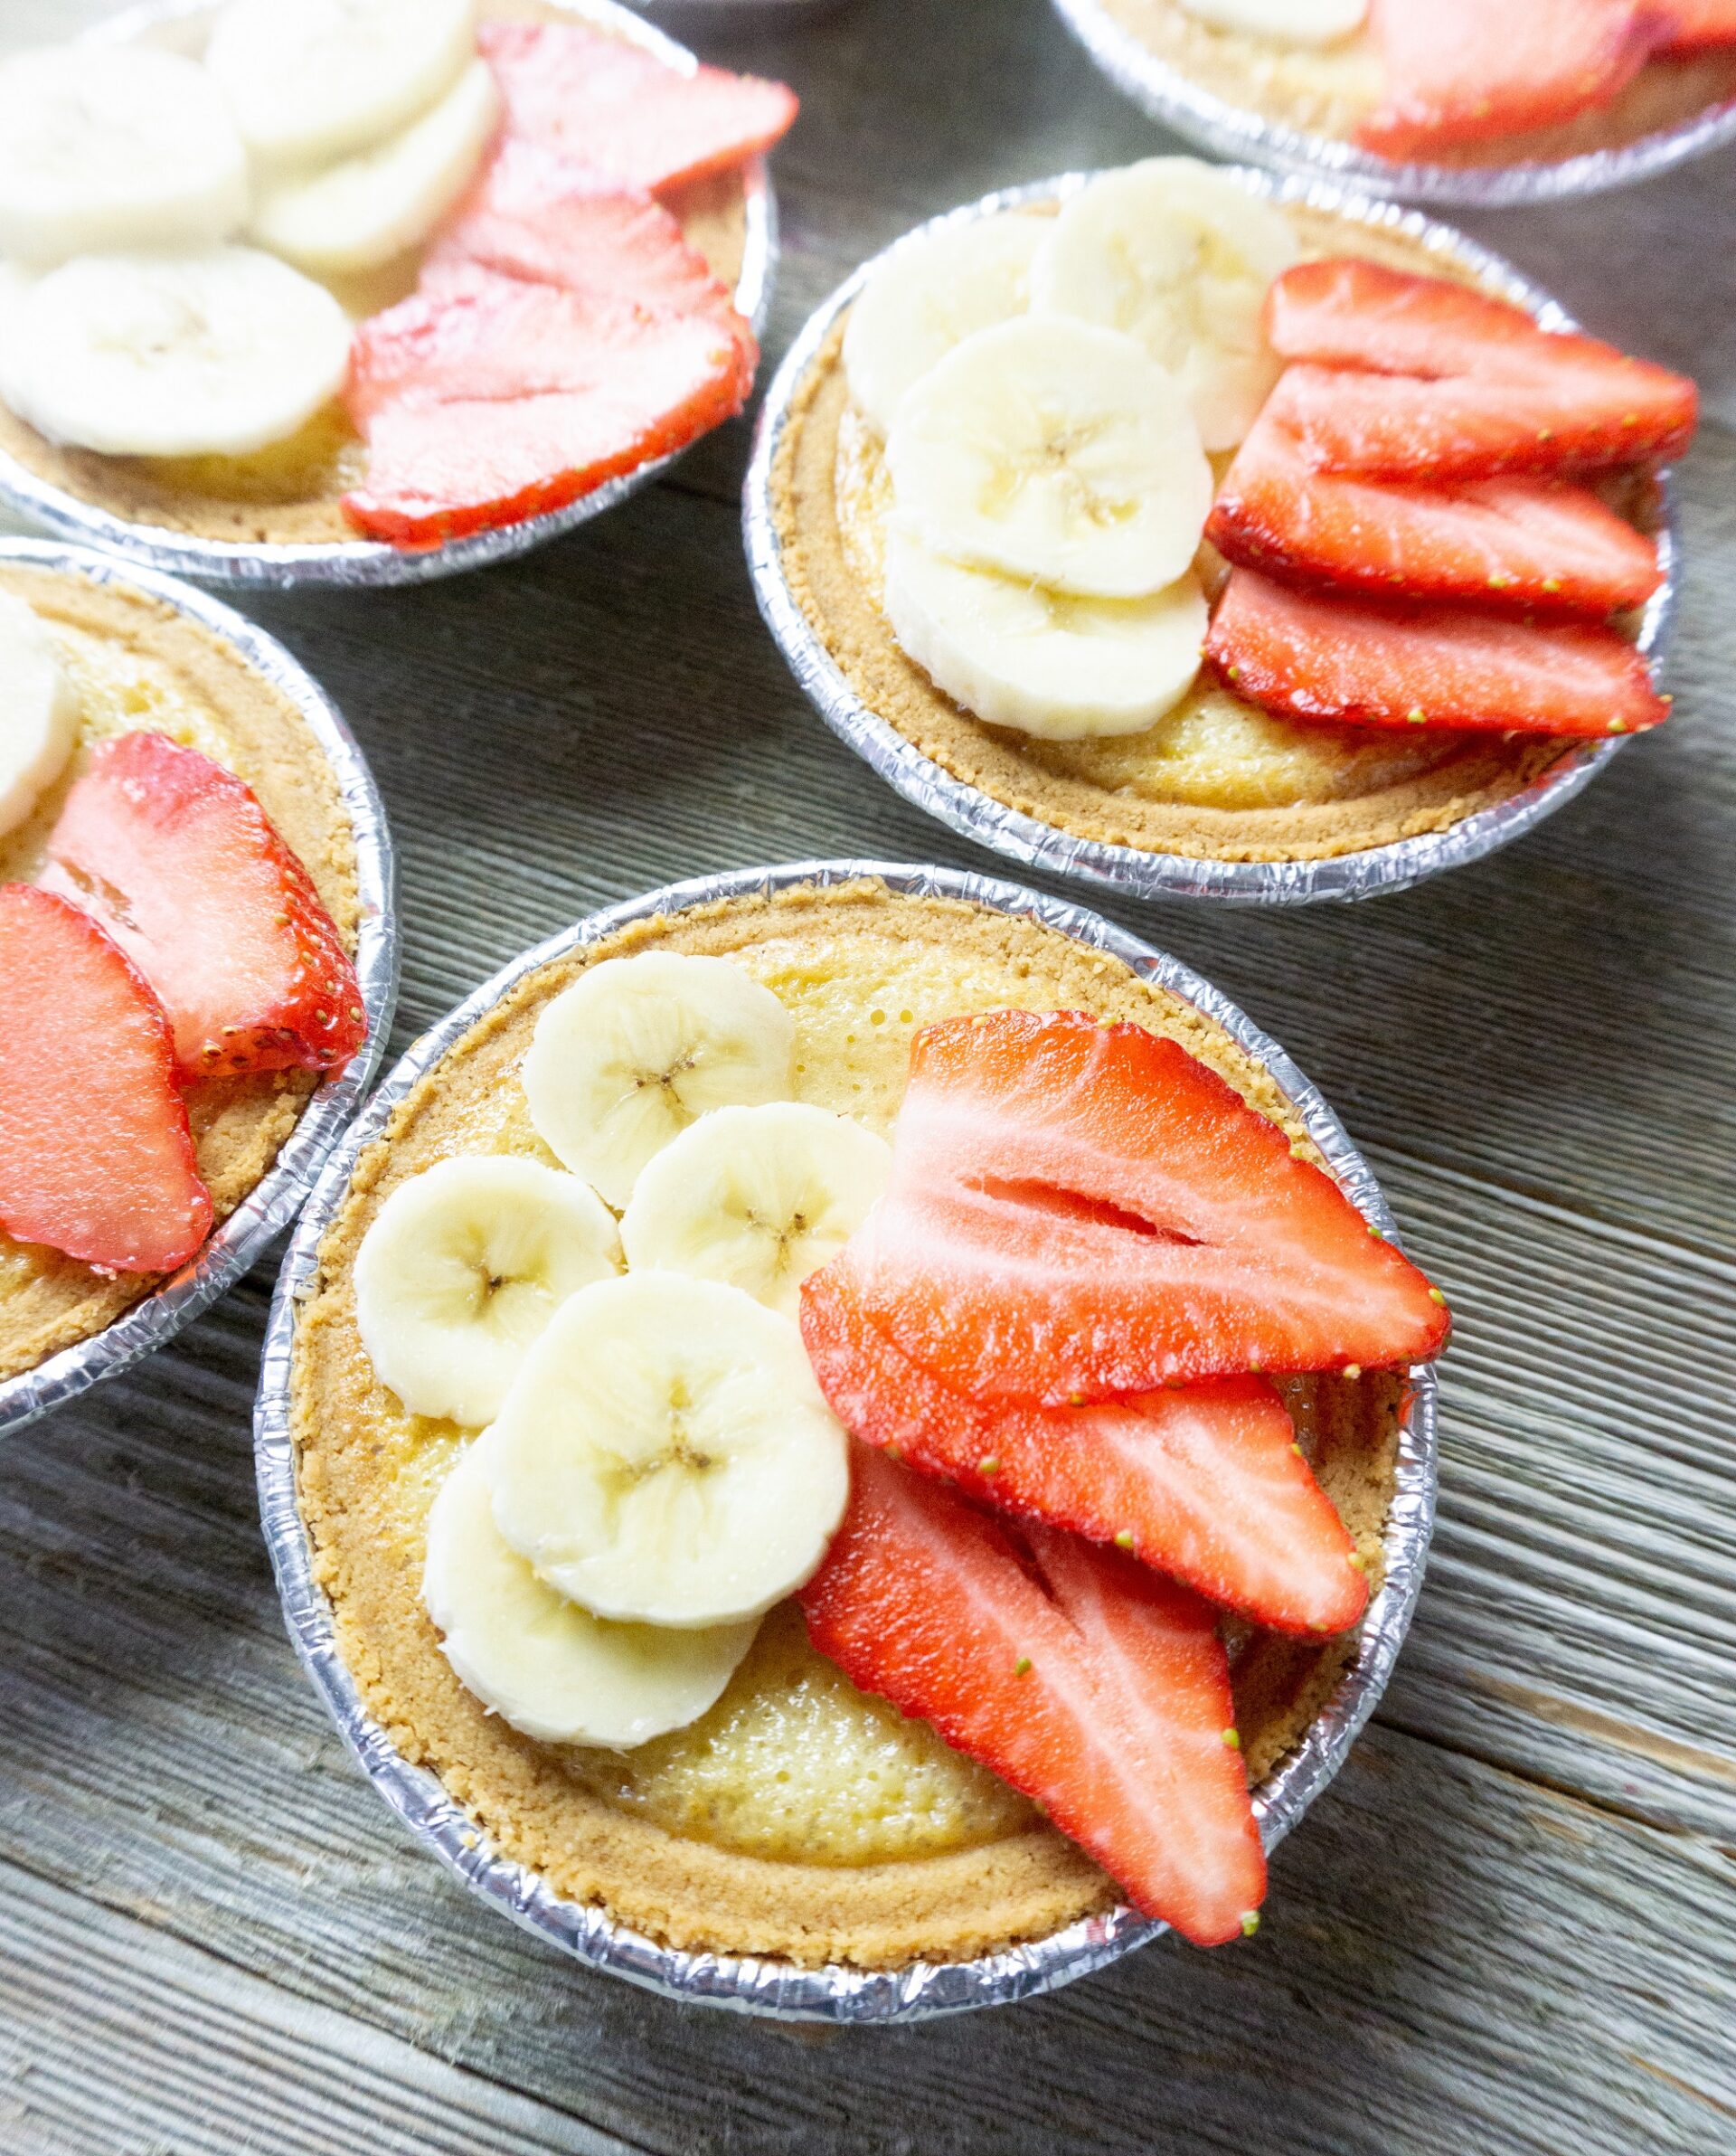 Mini Fruit Tarts with strawberries and banana slices.